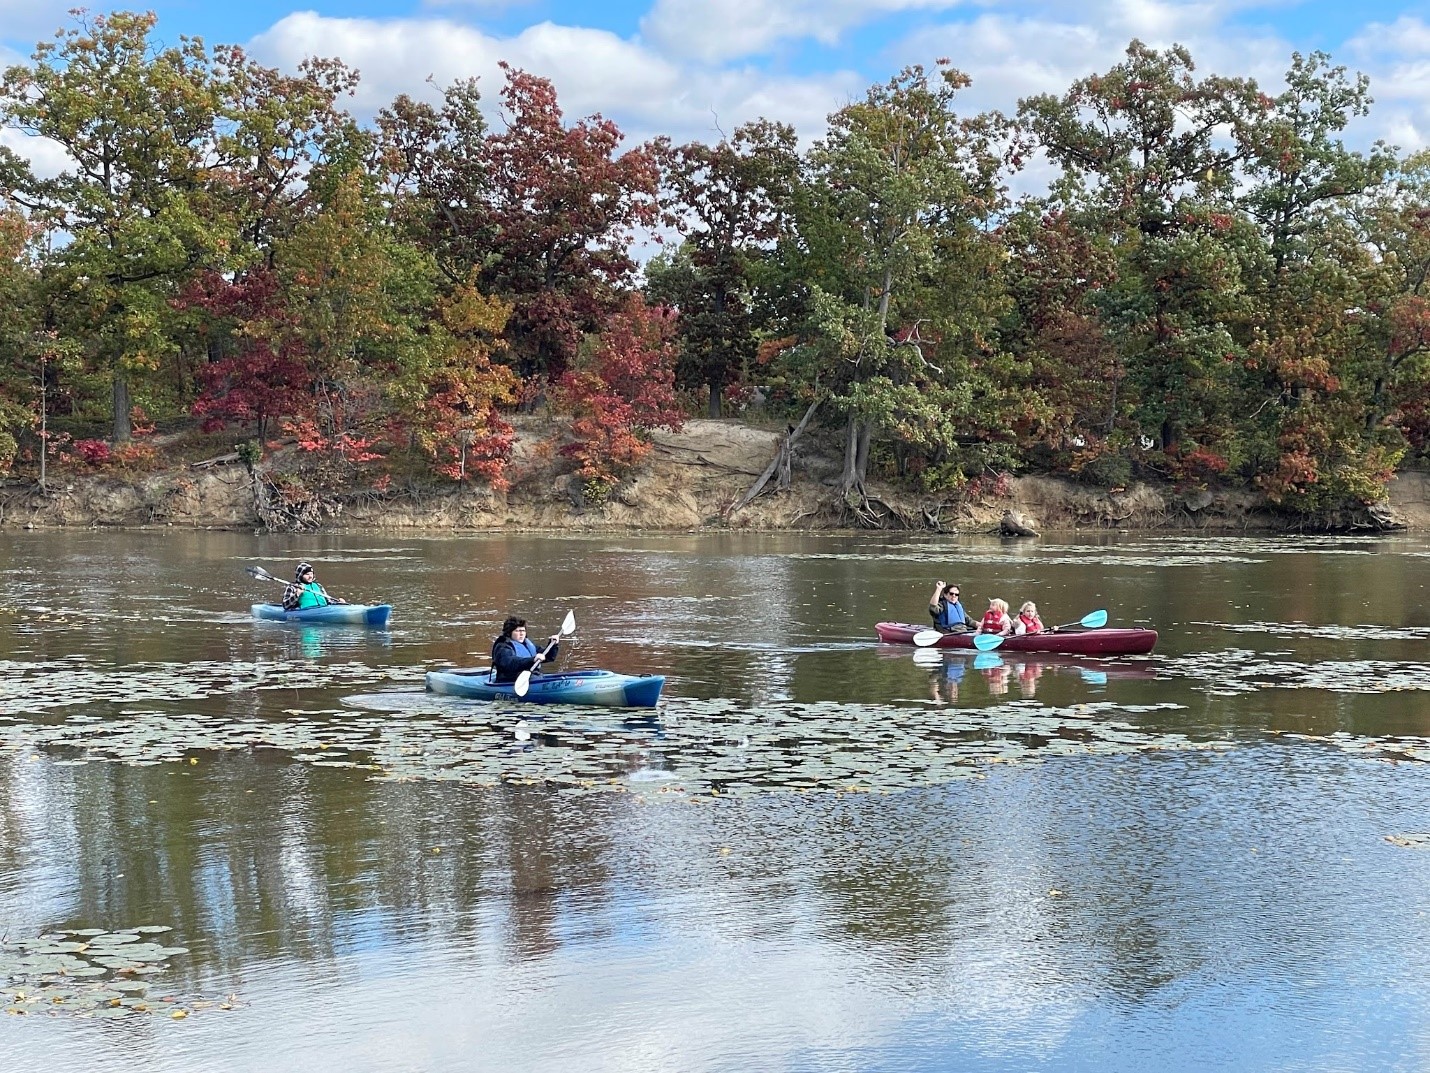 Youth kayaking on the River